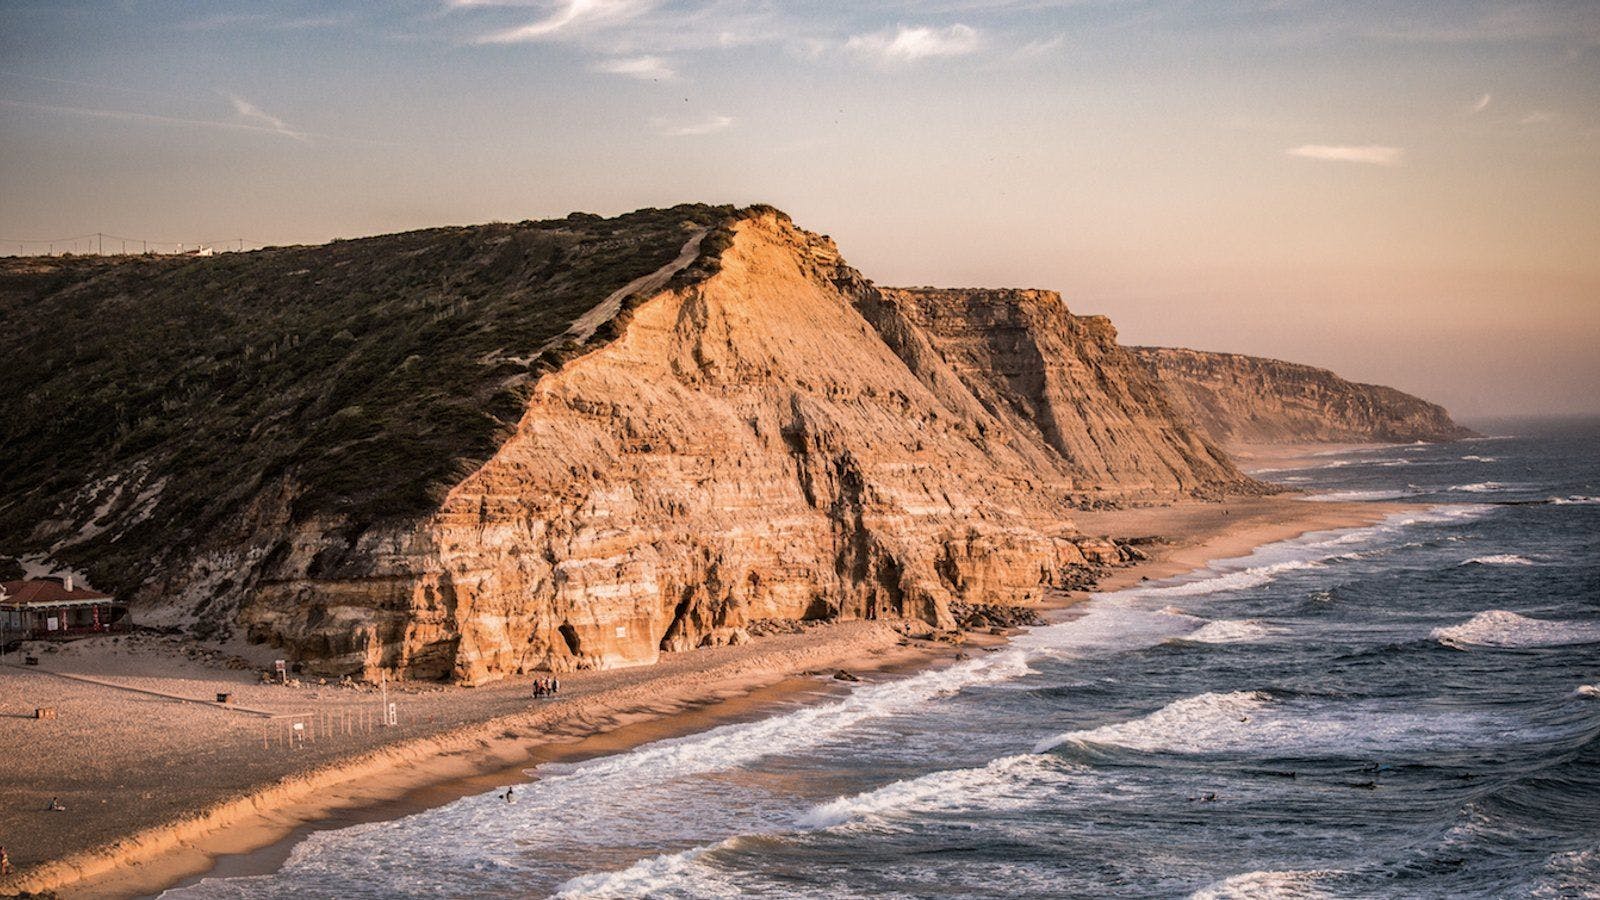 Coworking, Coliving and Surfing in Ericeira (Portugal)